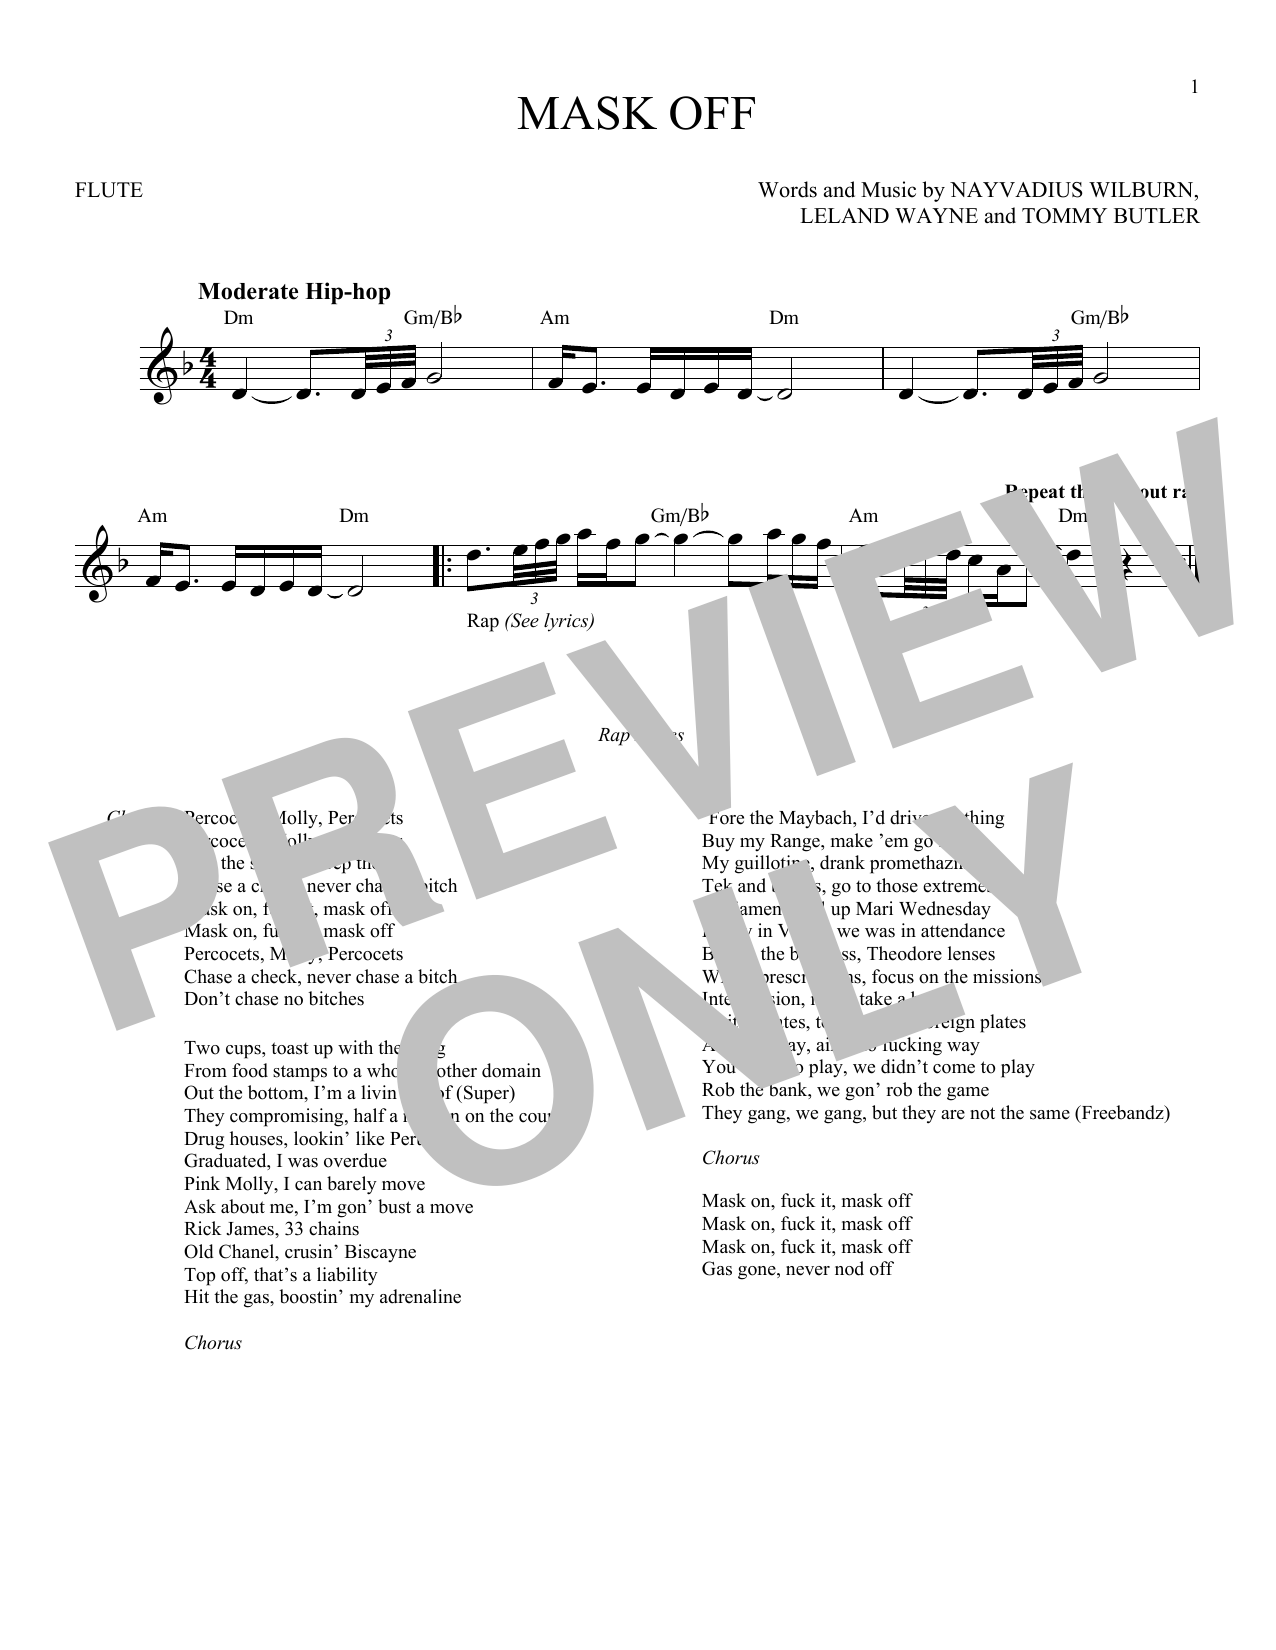 Future Off" Sheet Music PDF Notes, Chords | Pop Score Flute Solo Download Printable. SKU: 183834